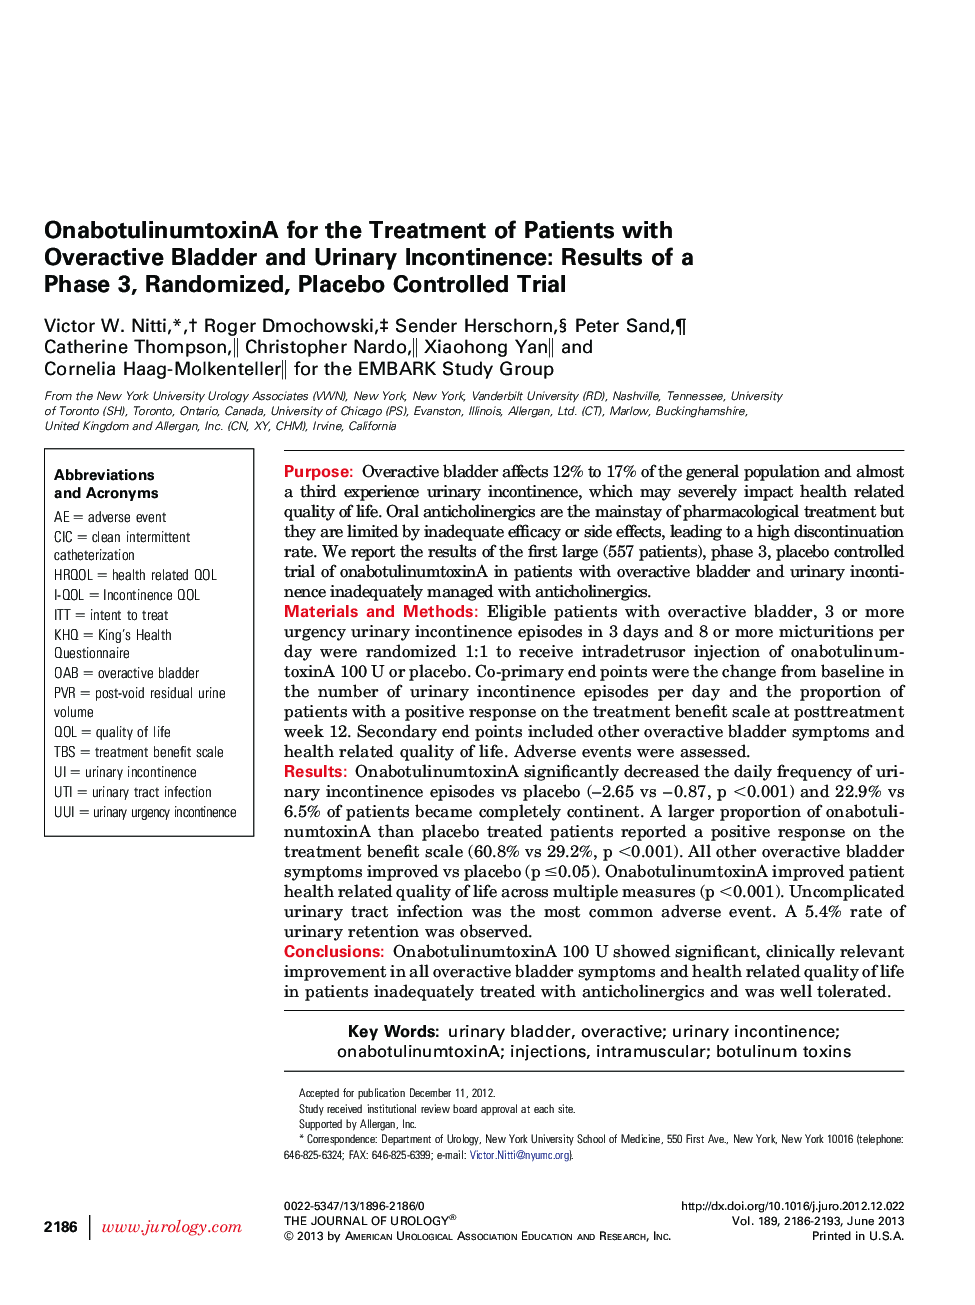 OnabotulinumtoxinA for the Treatment of Patients with Overactive Bladder and Urinary Incontinence: Results of a Phase 3, Randomized, Placebo Controlled Trial 